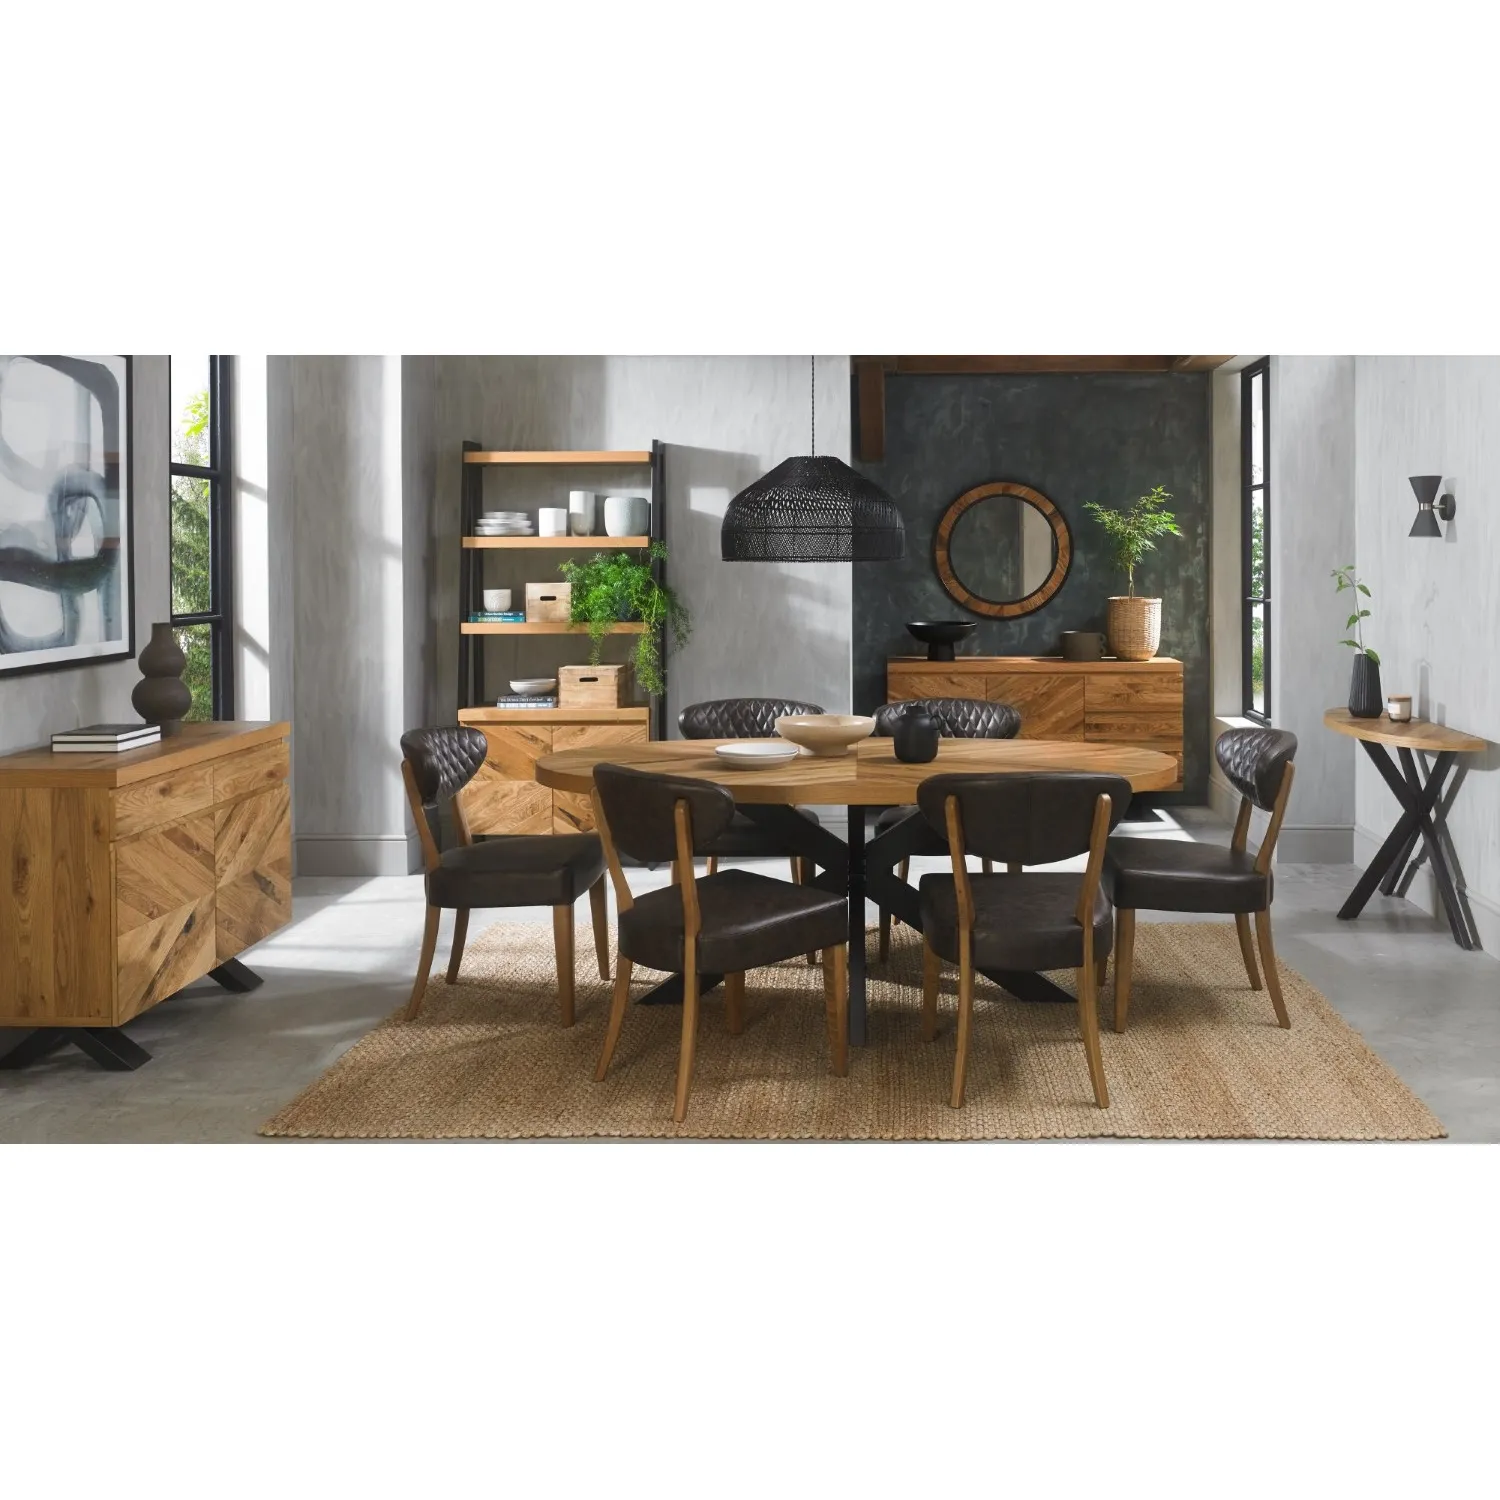 Rustic Oak Oval Dining Table x 6 Grey Leather Chairs Set